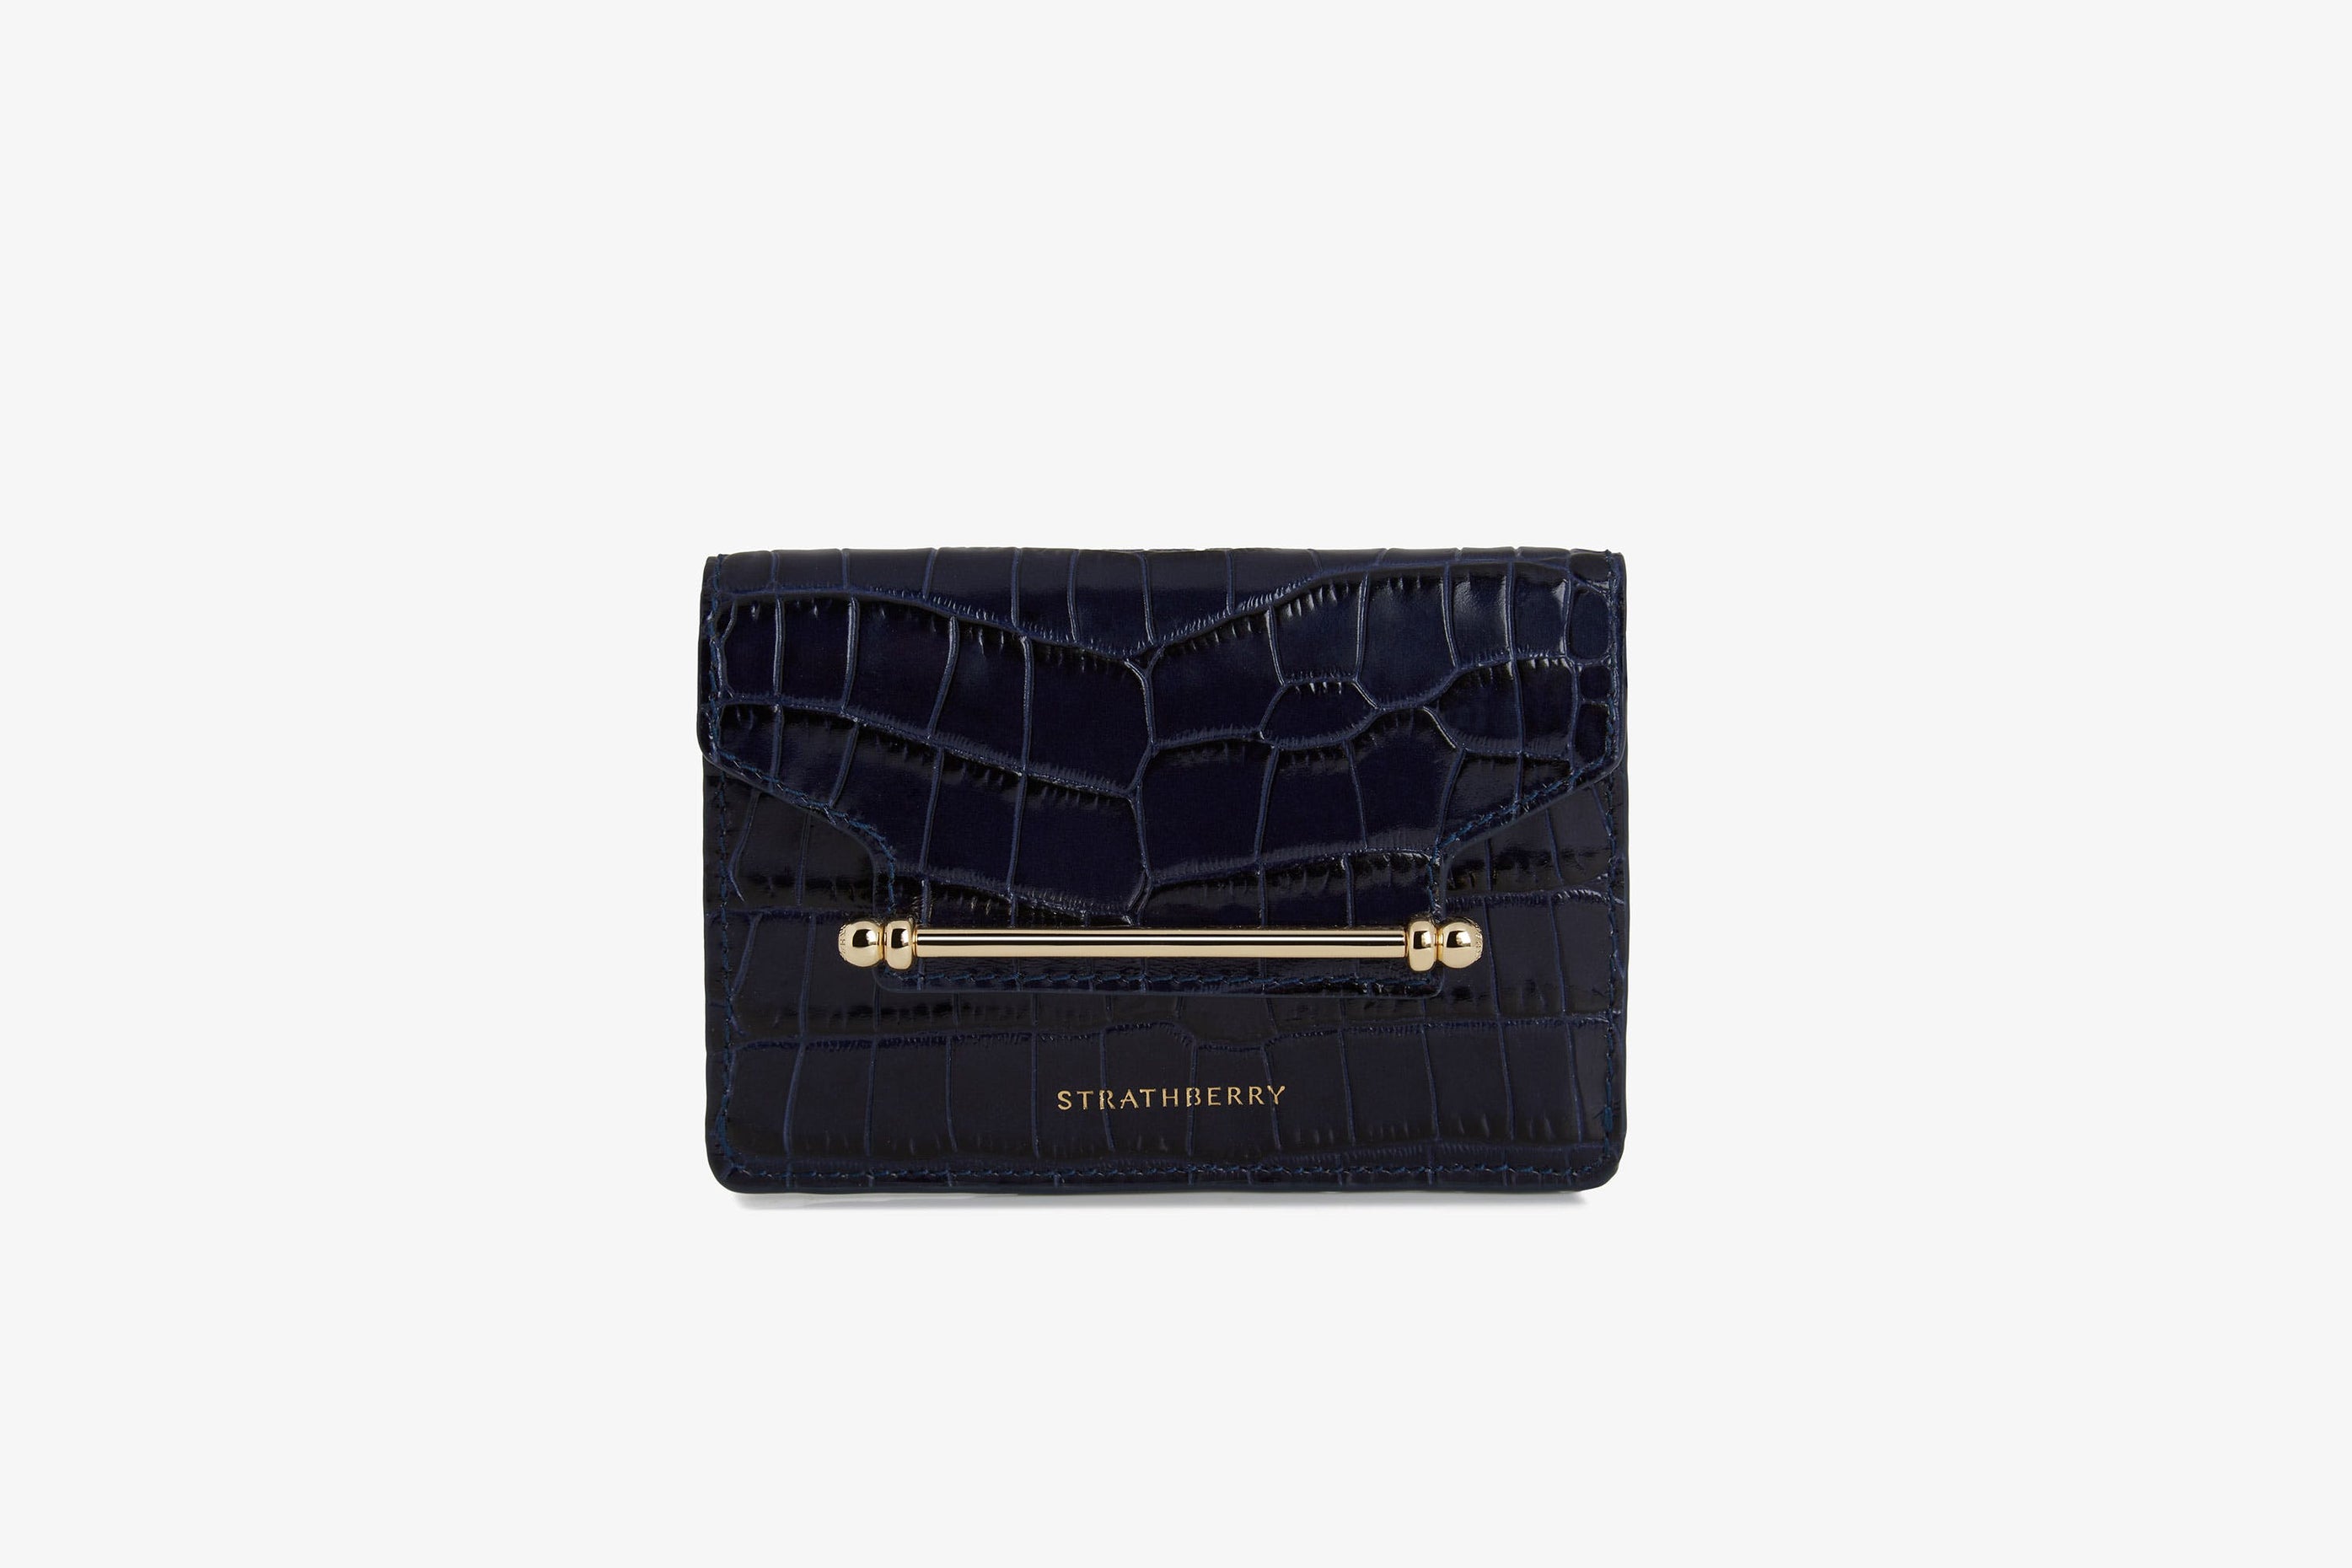 Strathberry - Multrees Compact Wallet - Navy | Strathberry